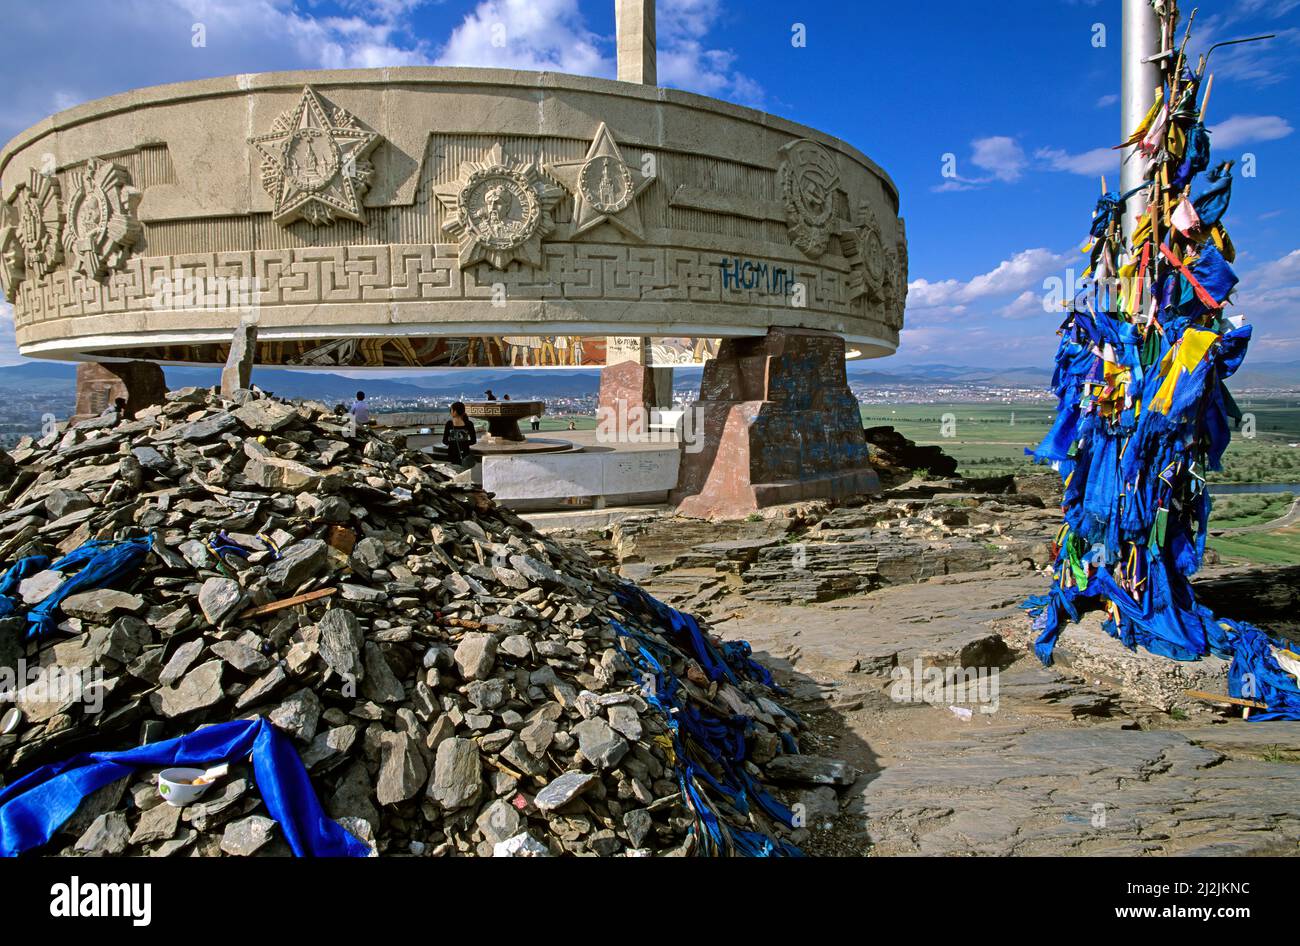 Mongolia. Ulaanbaatar. The Zaisan Memorial is a memorial south of the Mongolian capital of Ulaanbaatar that honors Soviet soldiers killed in World War Stock Photo